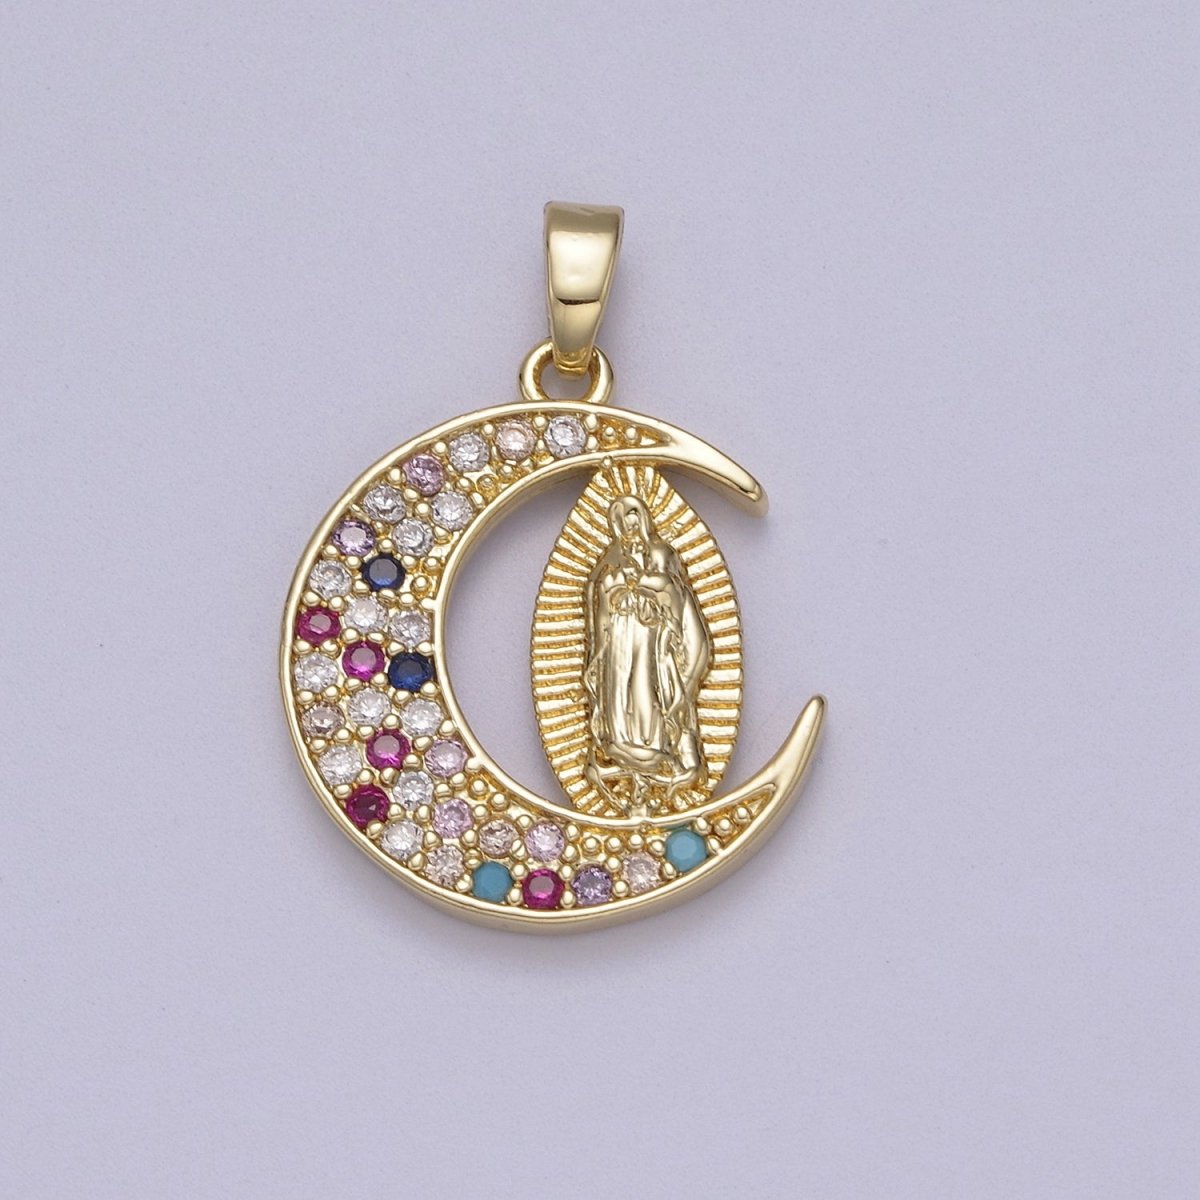 Dainty Crescent Moon Pendant with Lady Guadalupe Virgin Mary Charm N-588 N-589 - DLUXCA